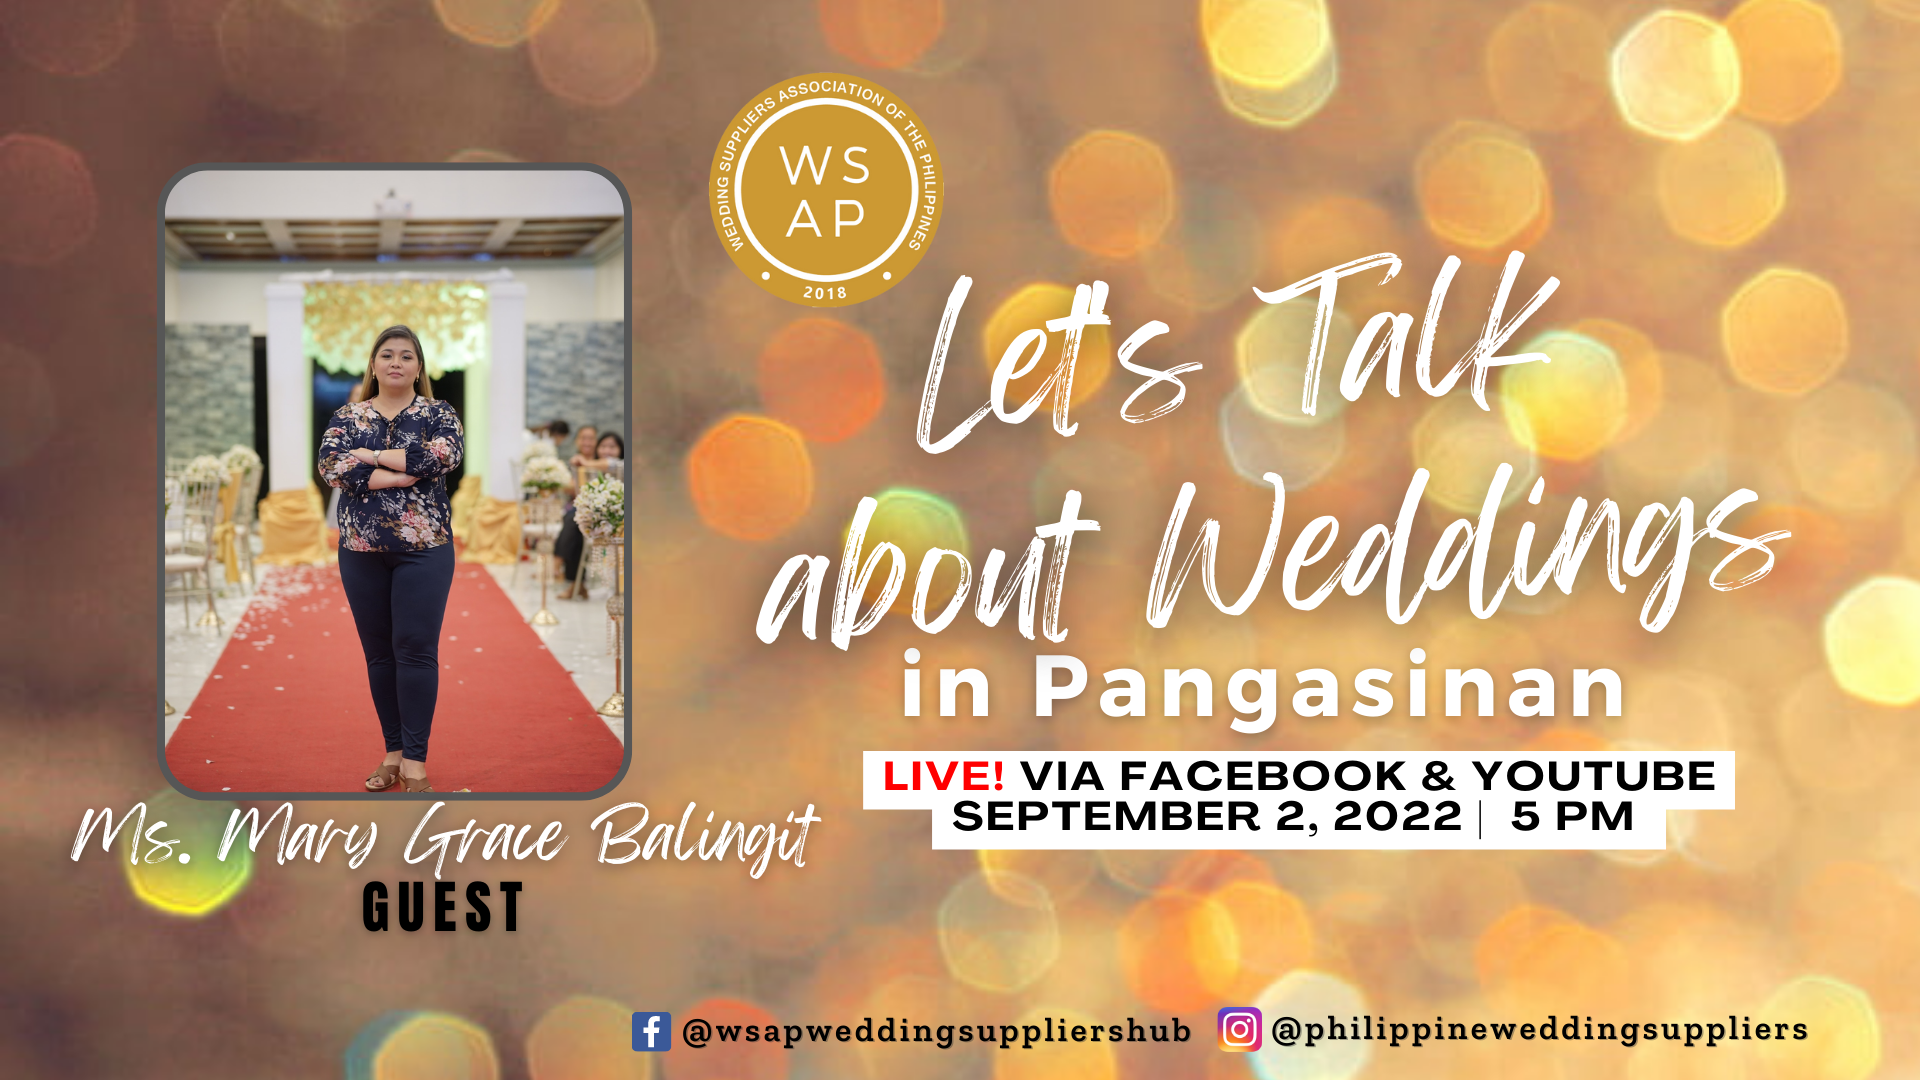 Let's Talk About Weddings in Pangasinan with Mary Grace Balingit